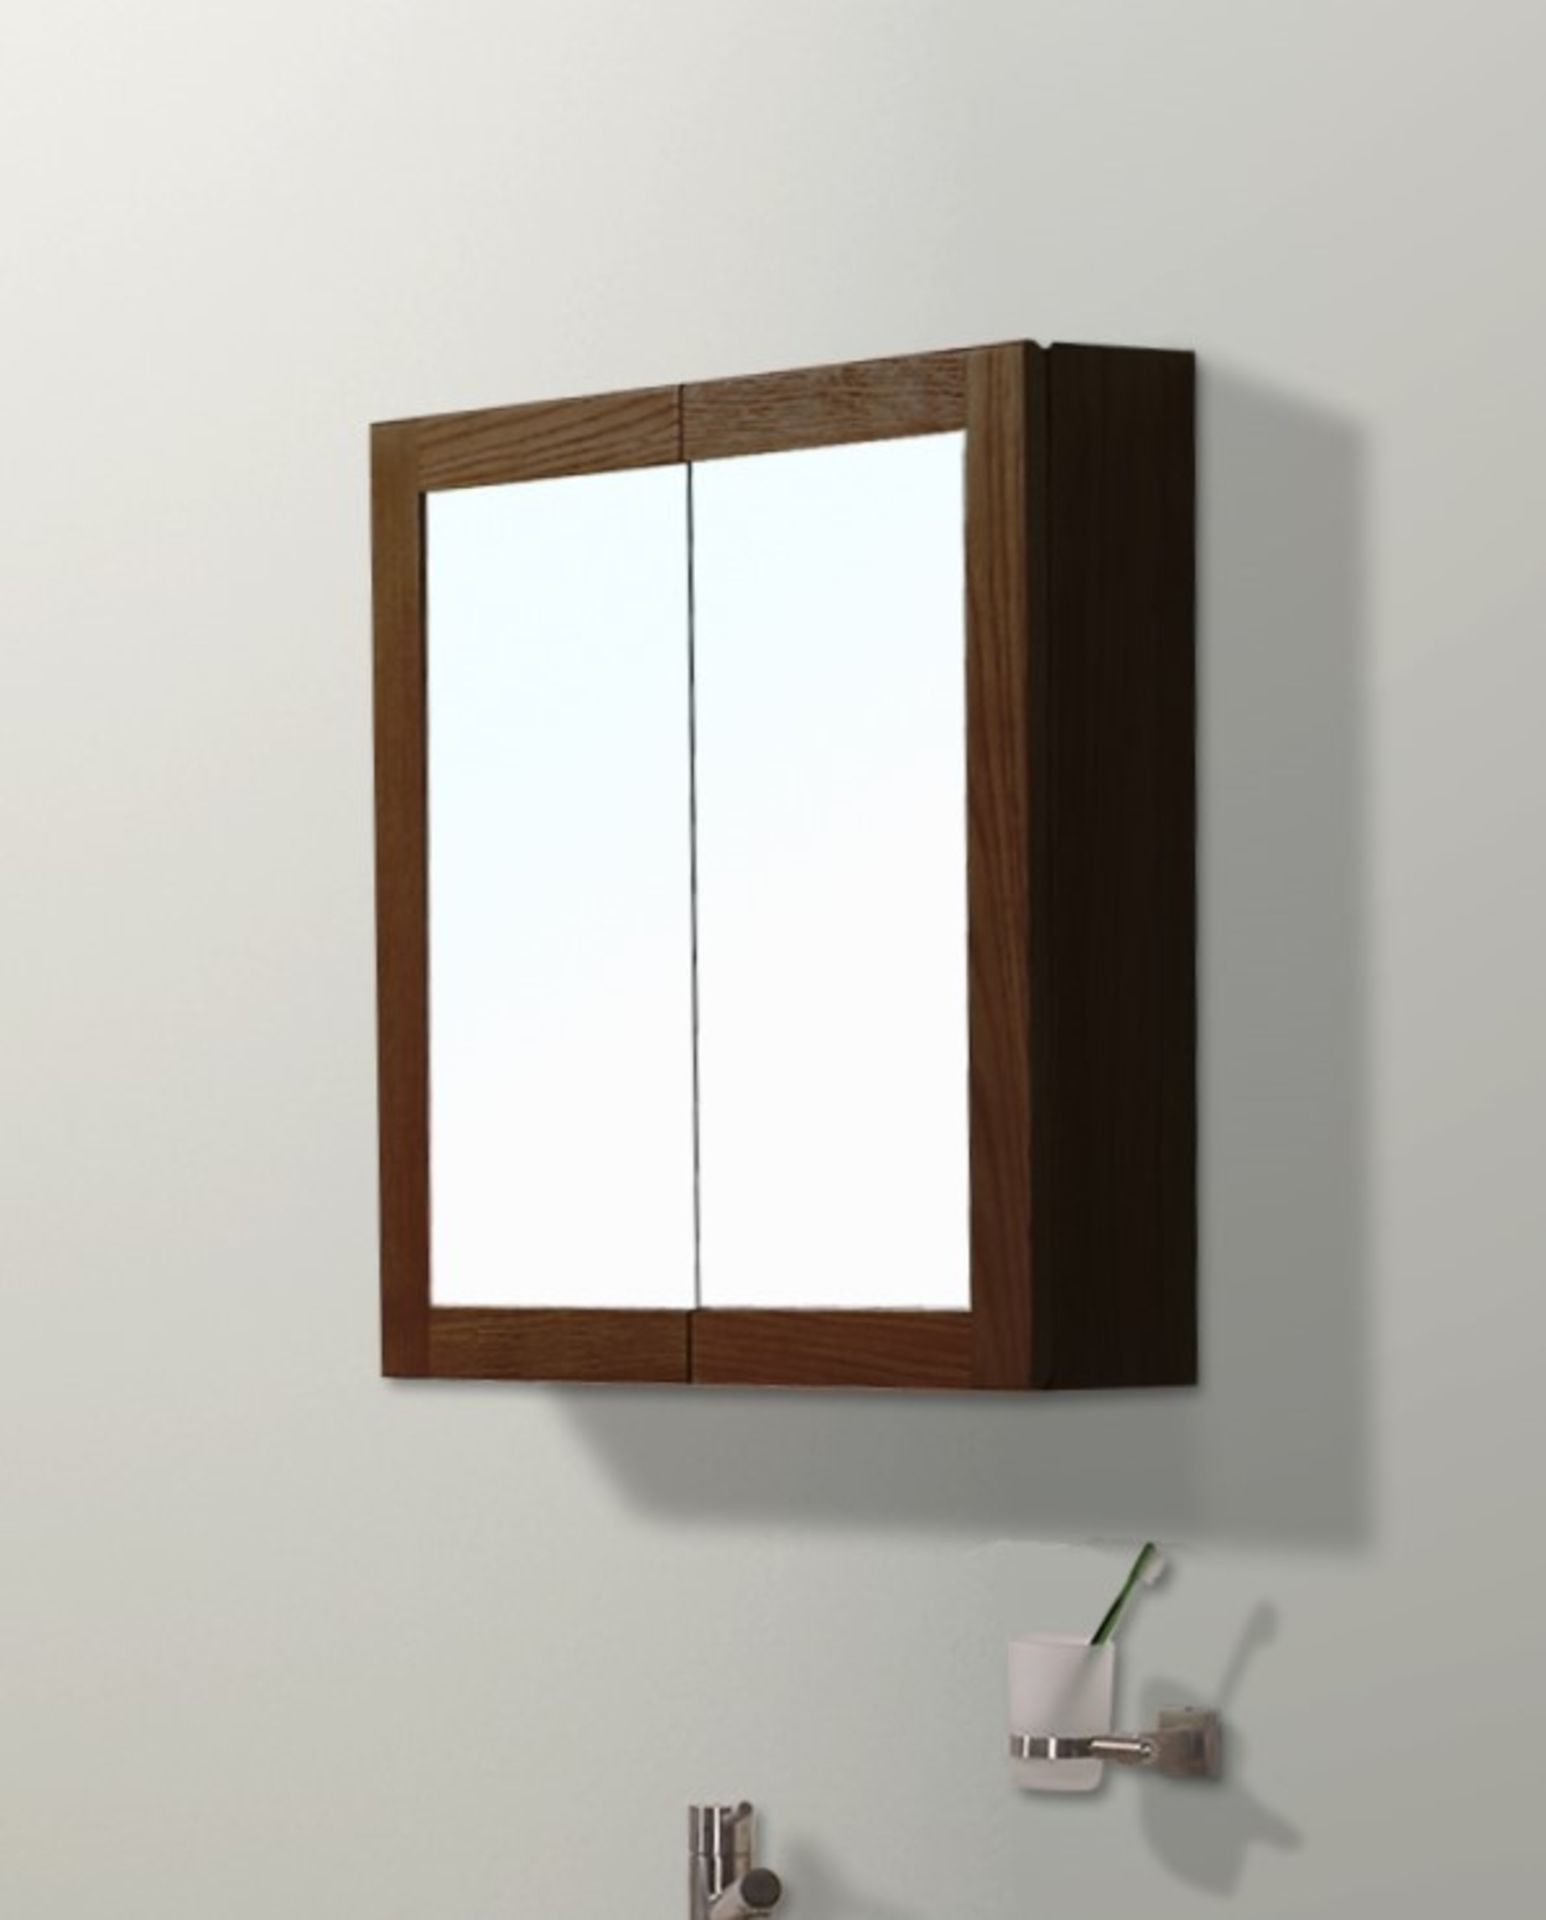 1 x Stonearth 600mm Wall Mounted Mirrored Bathroom Storage Cabinet - American Solid Walnut With - Image 3 of 10